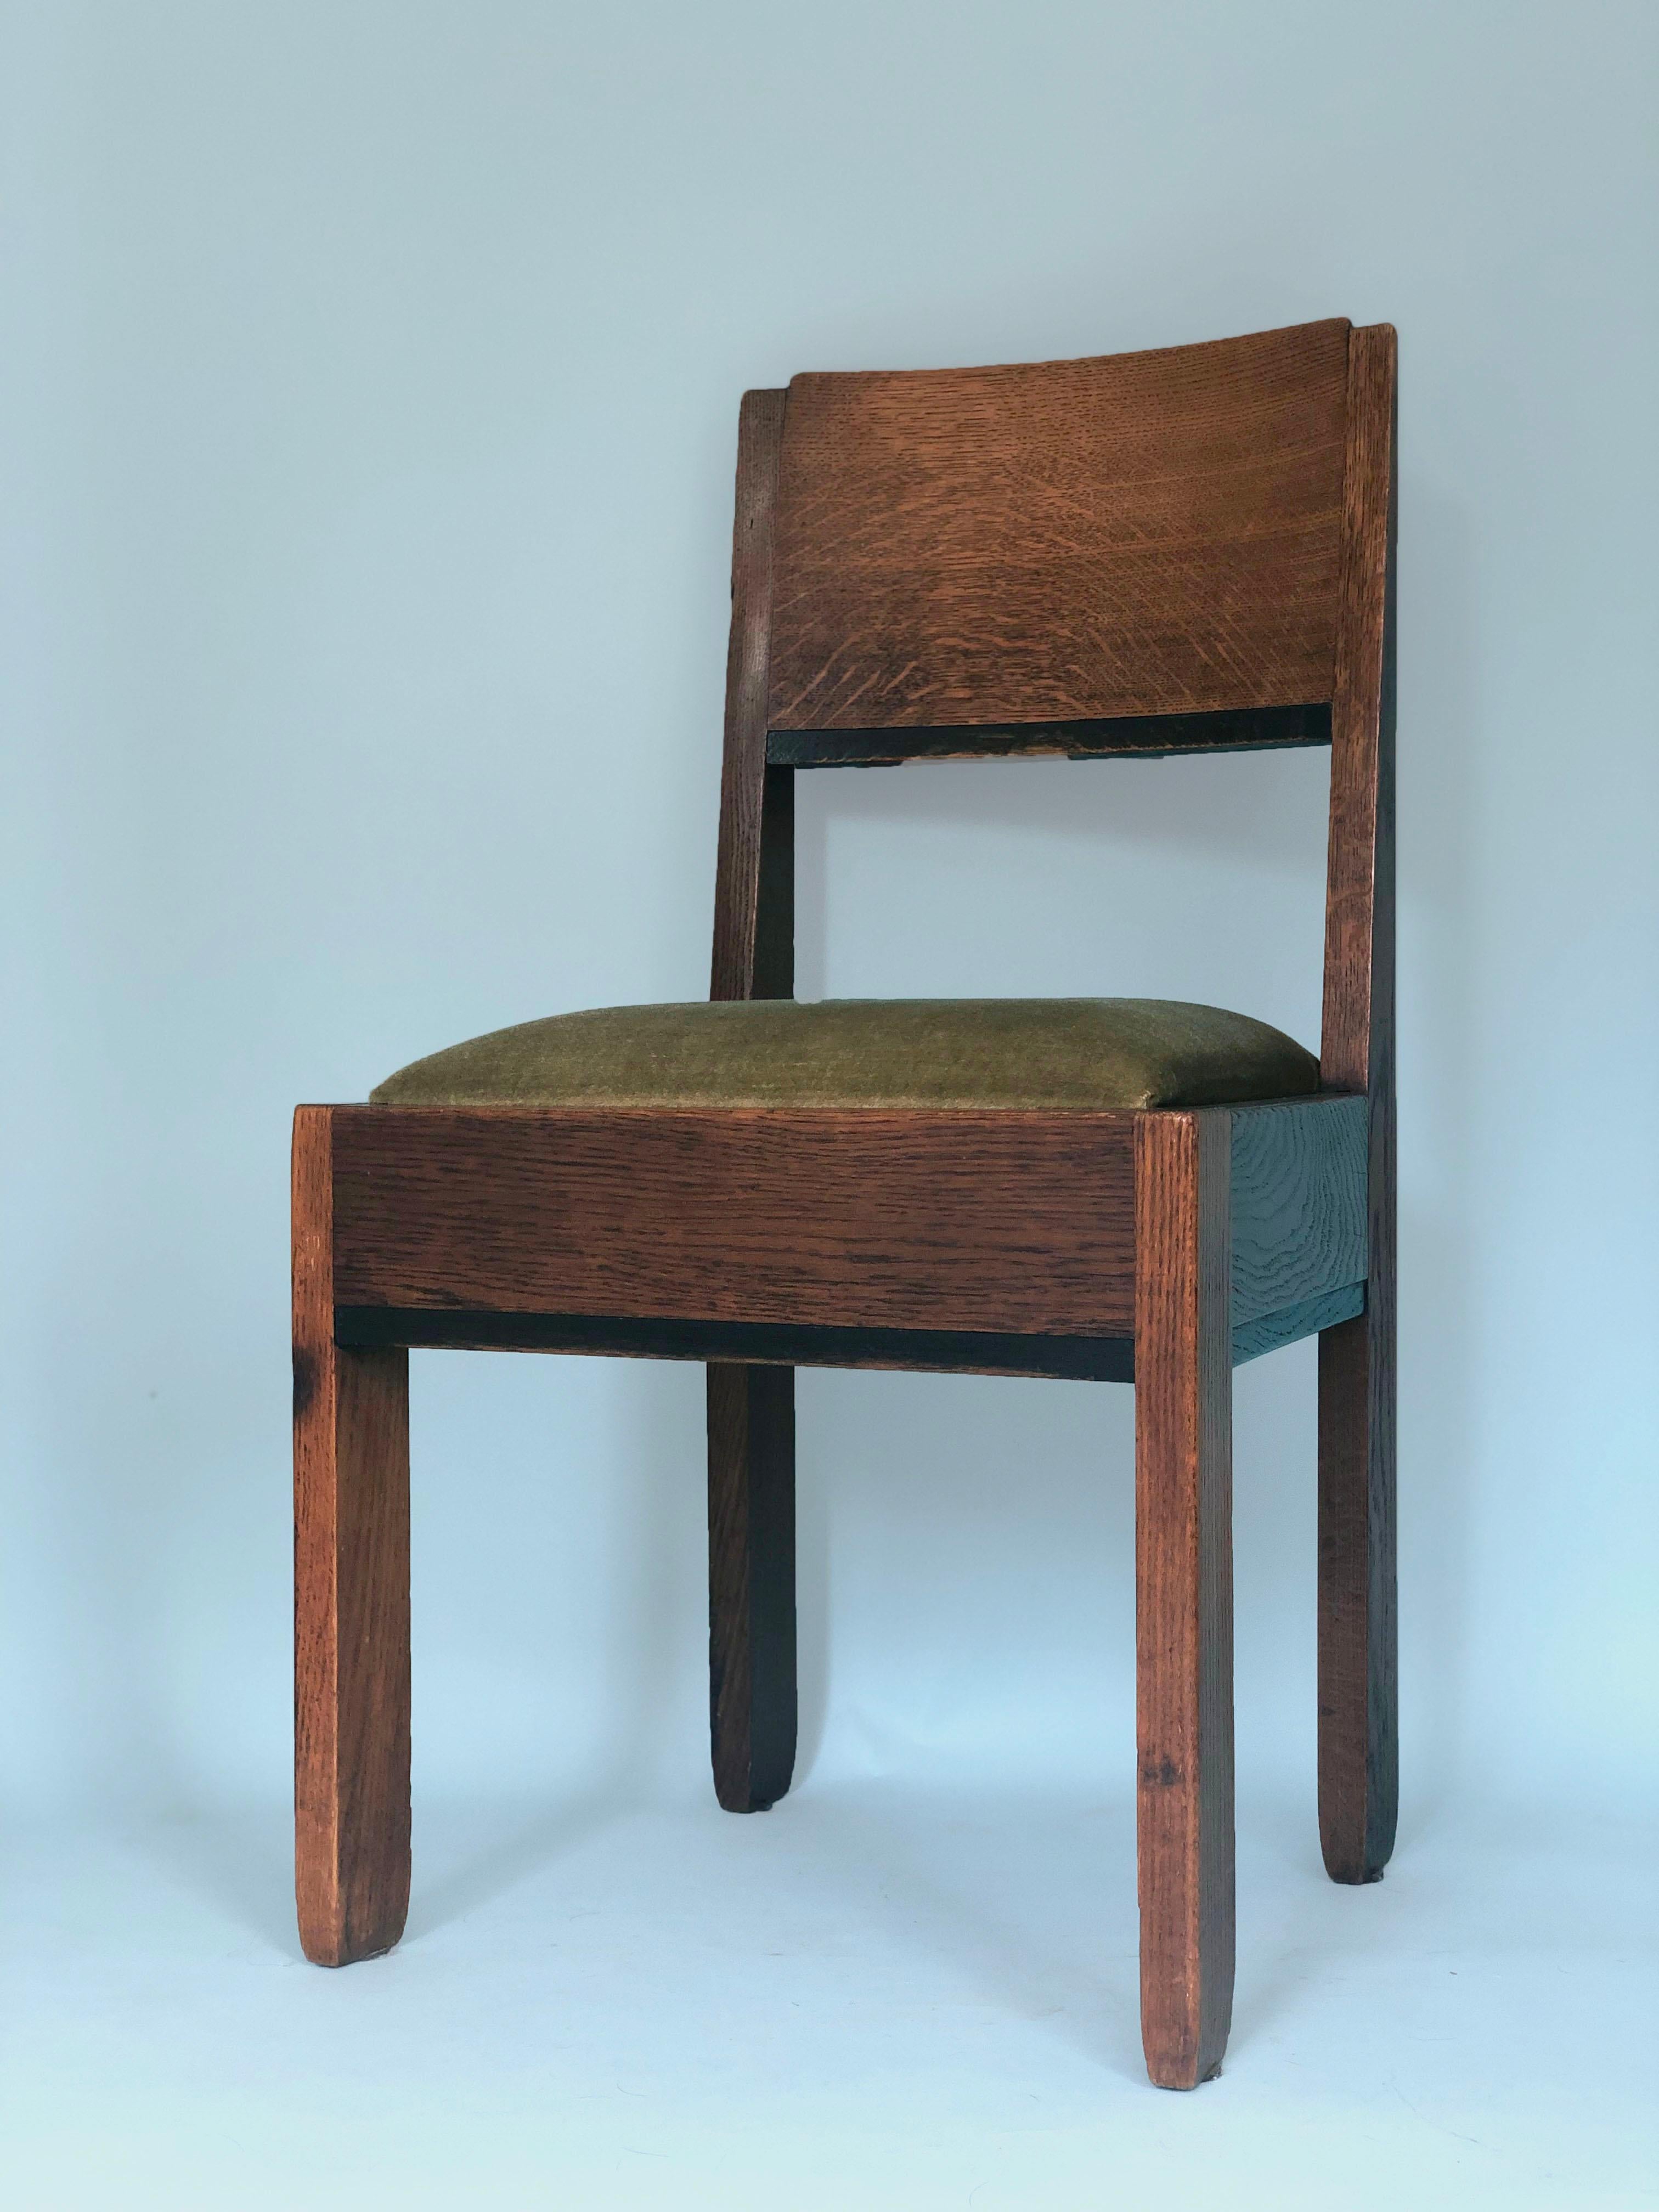 A Beautiful shaped design piece. Oak Art Deco dining chair by J.A. Muntendam for L.O.V. Oosterbeek from the 1920s. The solid chairs are polished, marked and the seat is renieuwd and reupholstered in a green rib fabric.

N.V. Labor Omnia Vincit